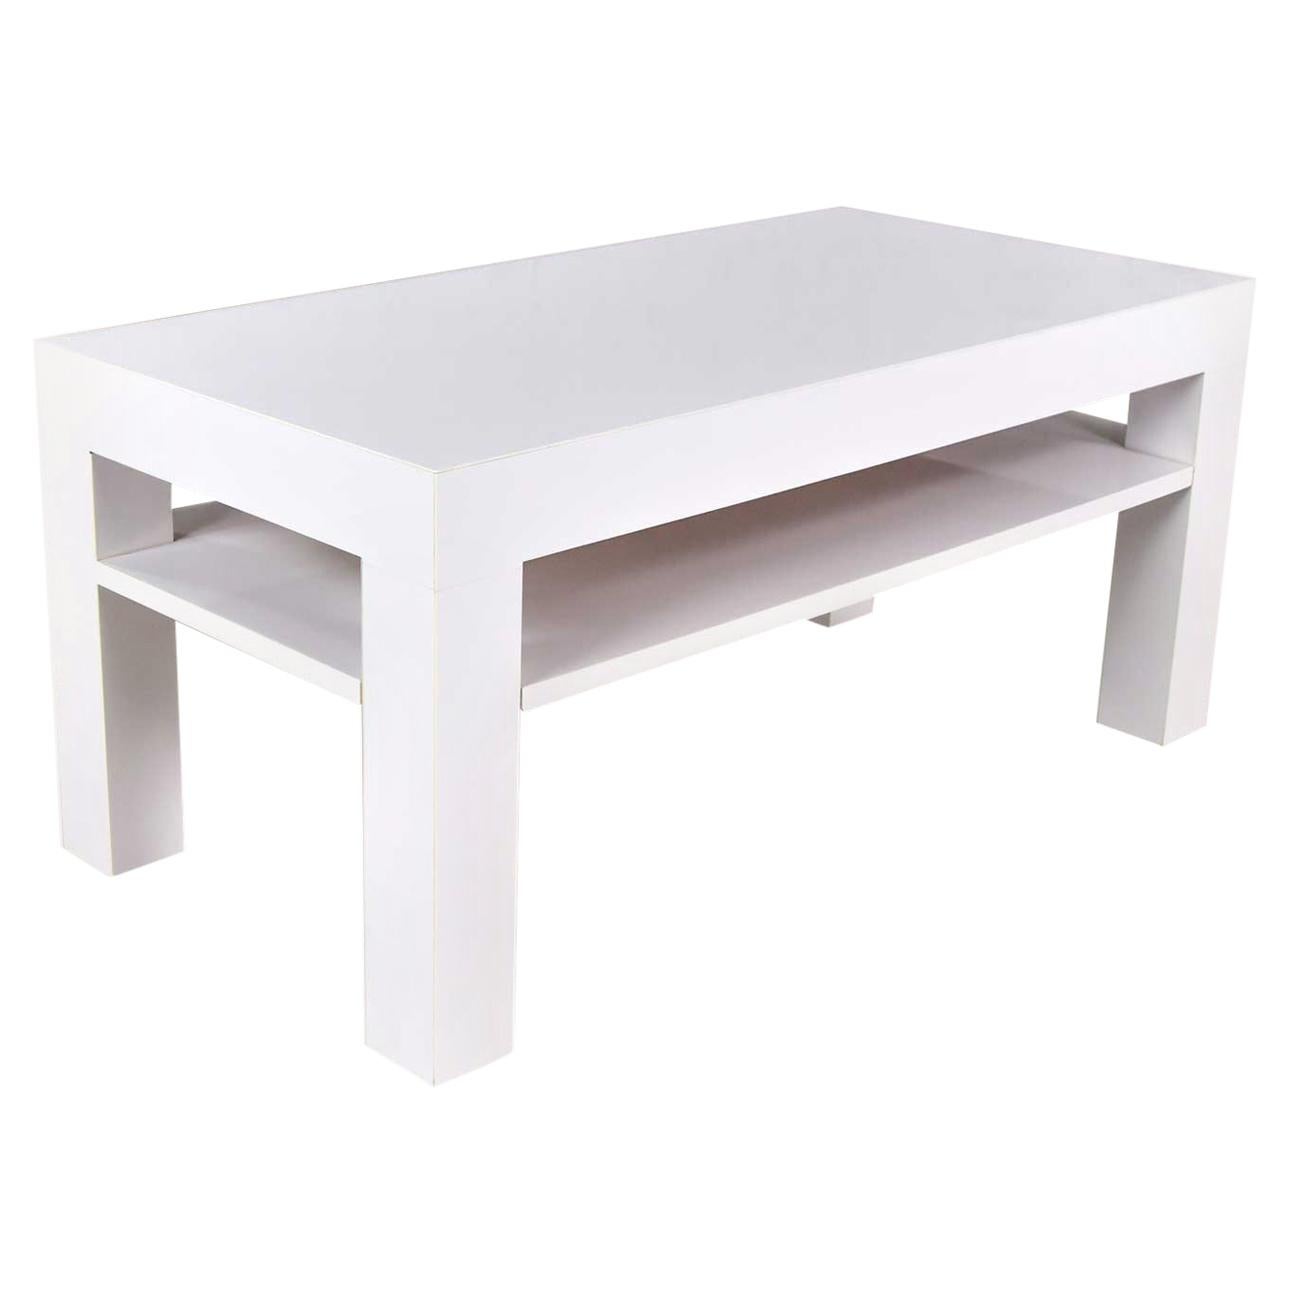 Mid-Century Modern Two-Tiered White Laminate Parson’s Style Coffee or End Table For Sale